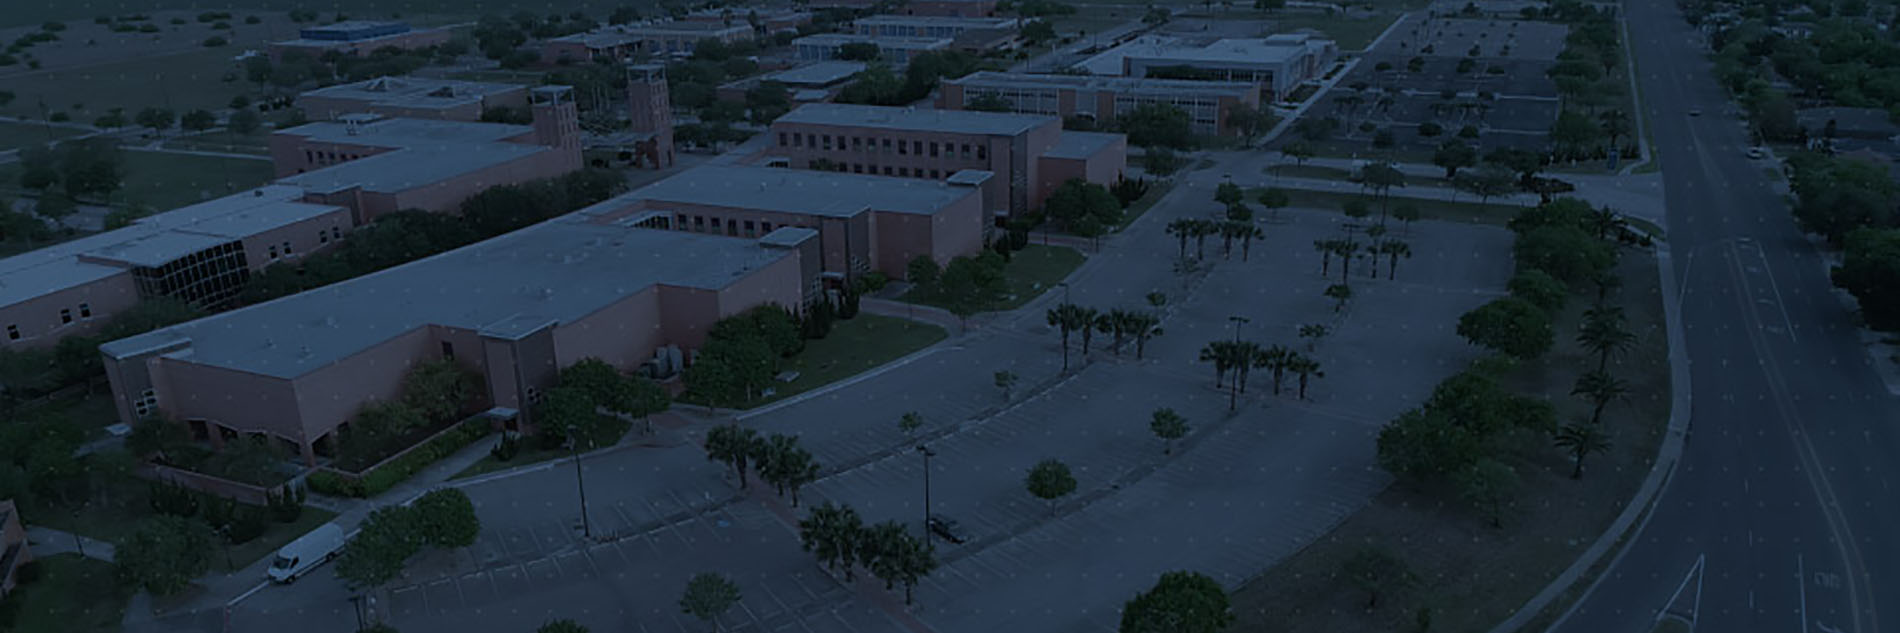 Aerial image of West Campus parking lot